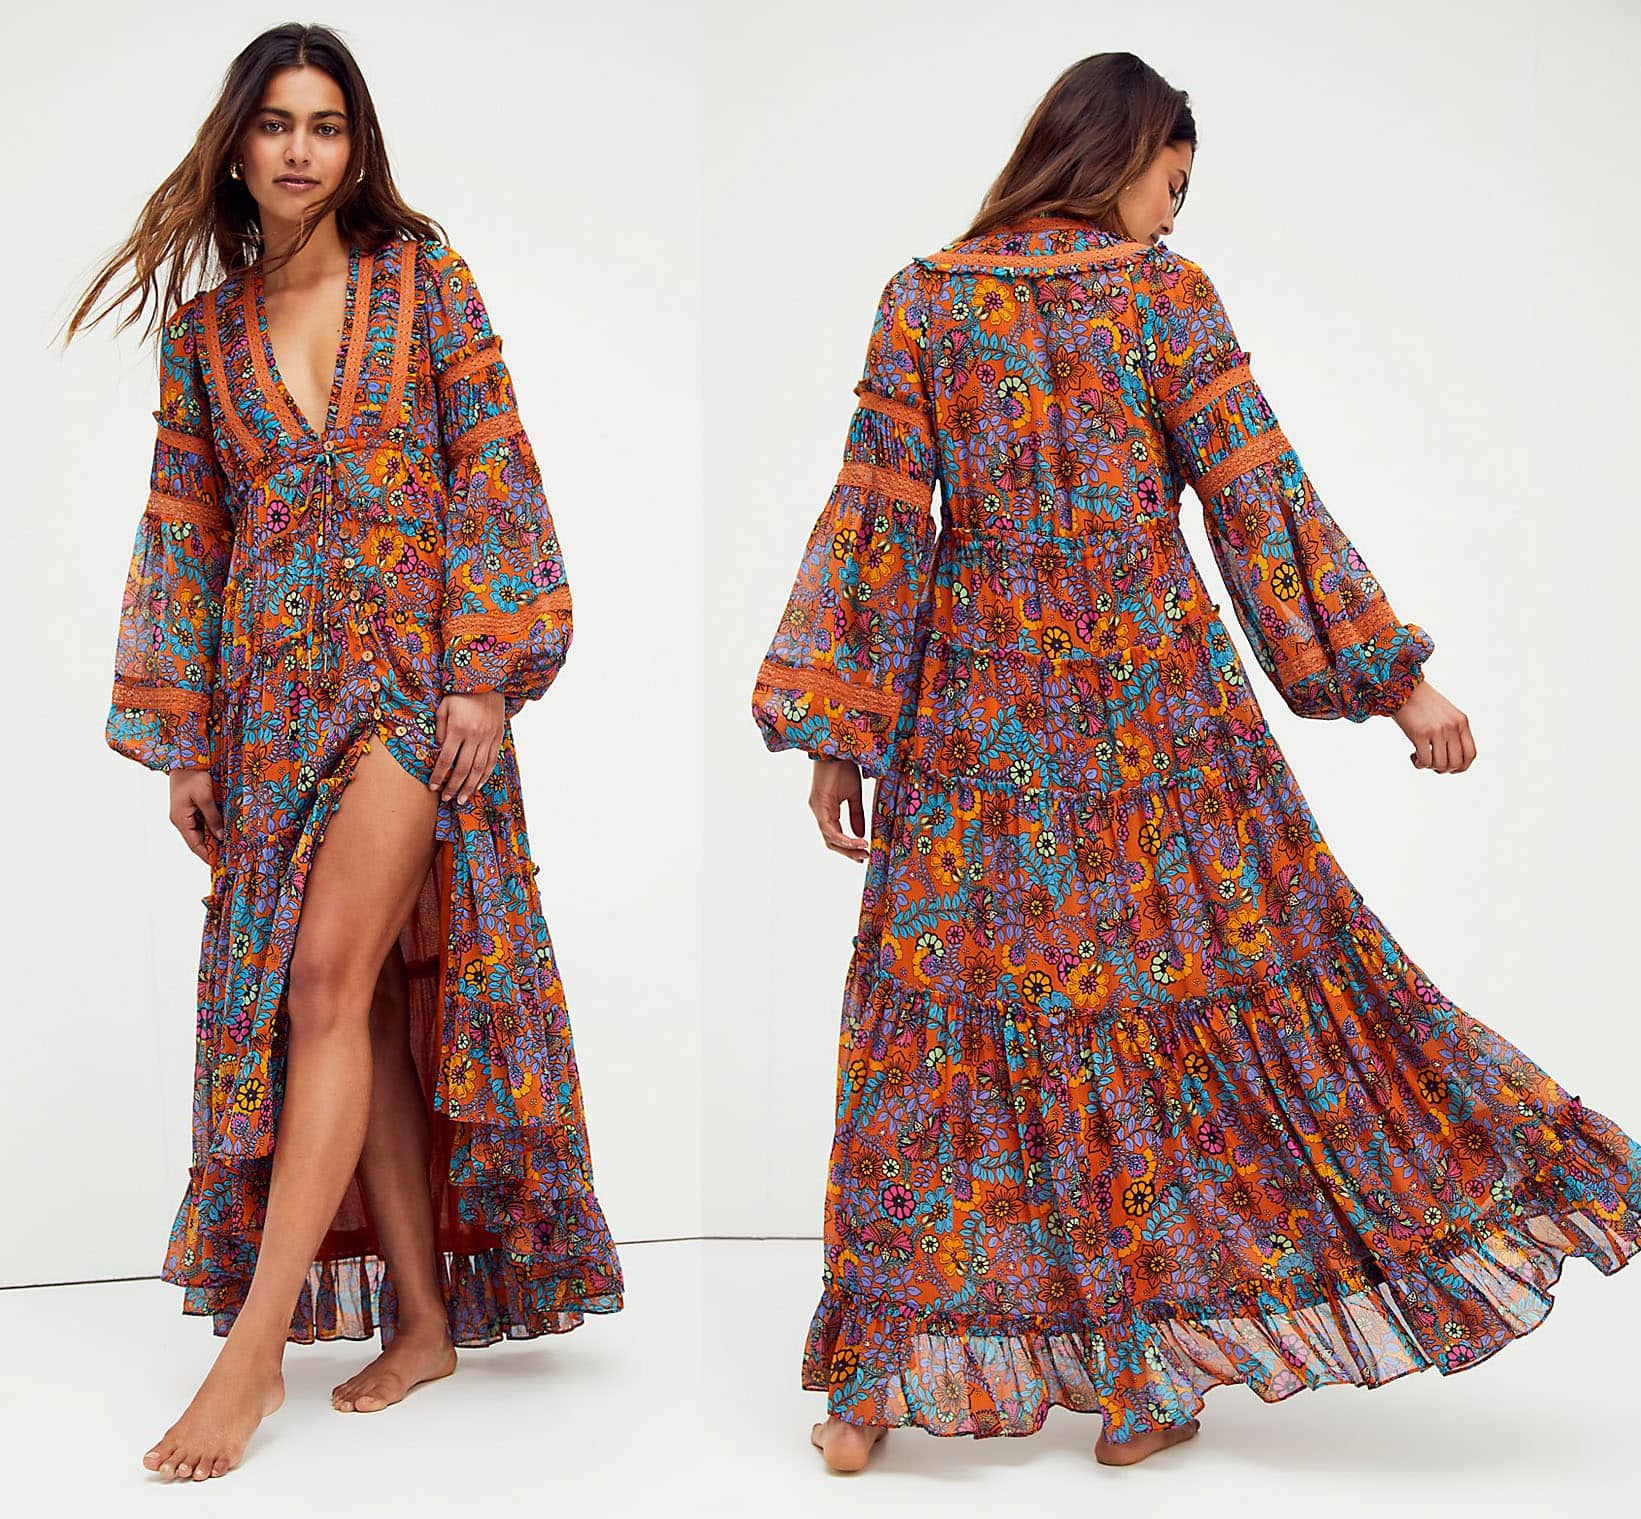 Go the boho route in this flowy floral tiered midi dress from Free People